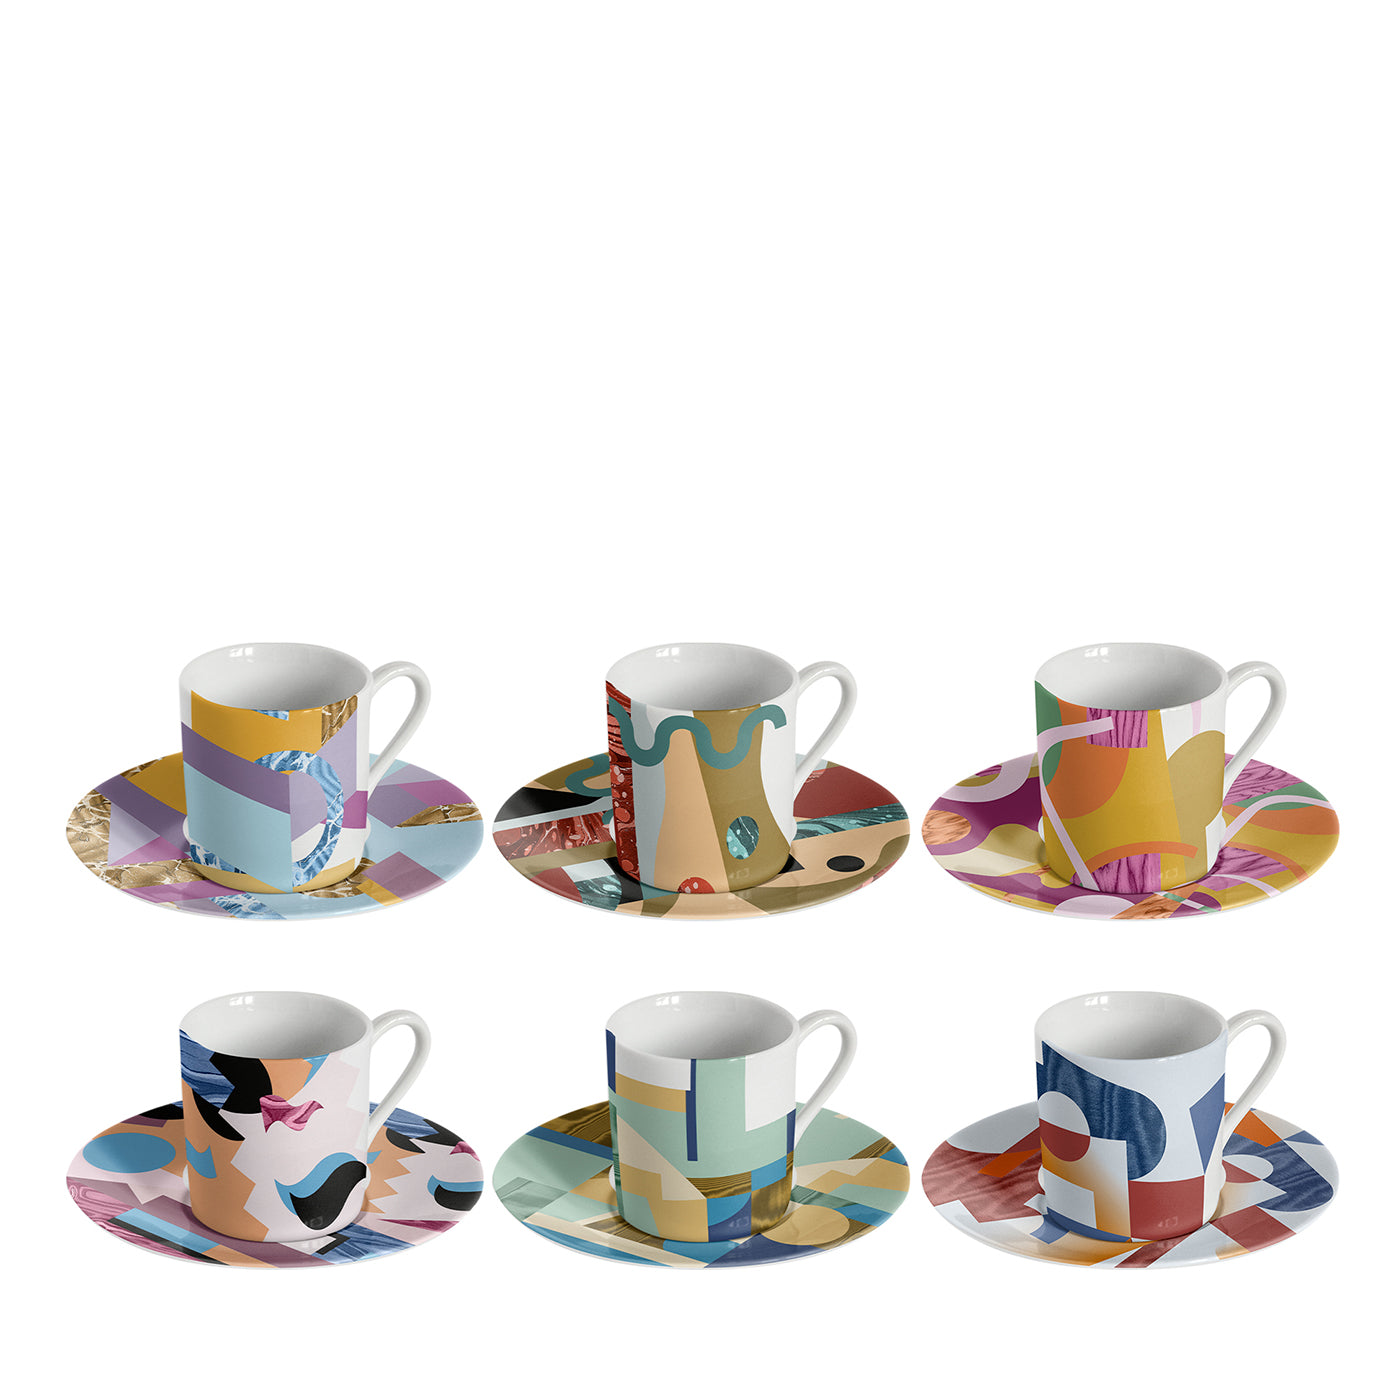 Alchimie set of 6 Porcelain Espresso Cups with Abstract Decor - Main view